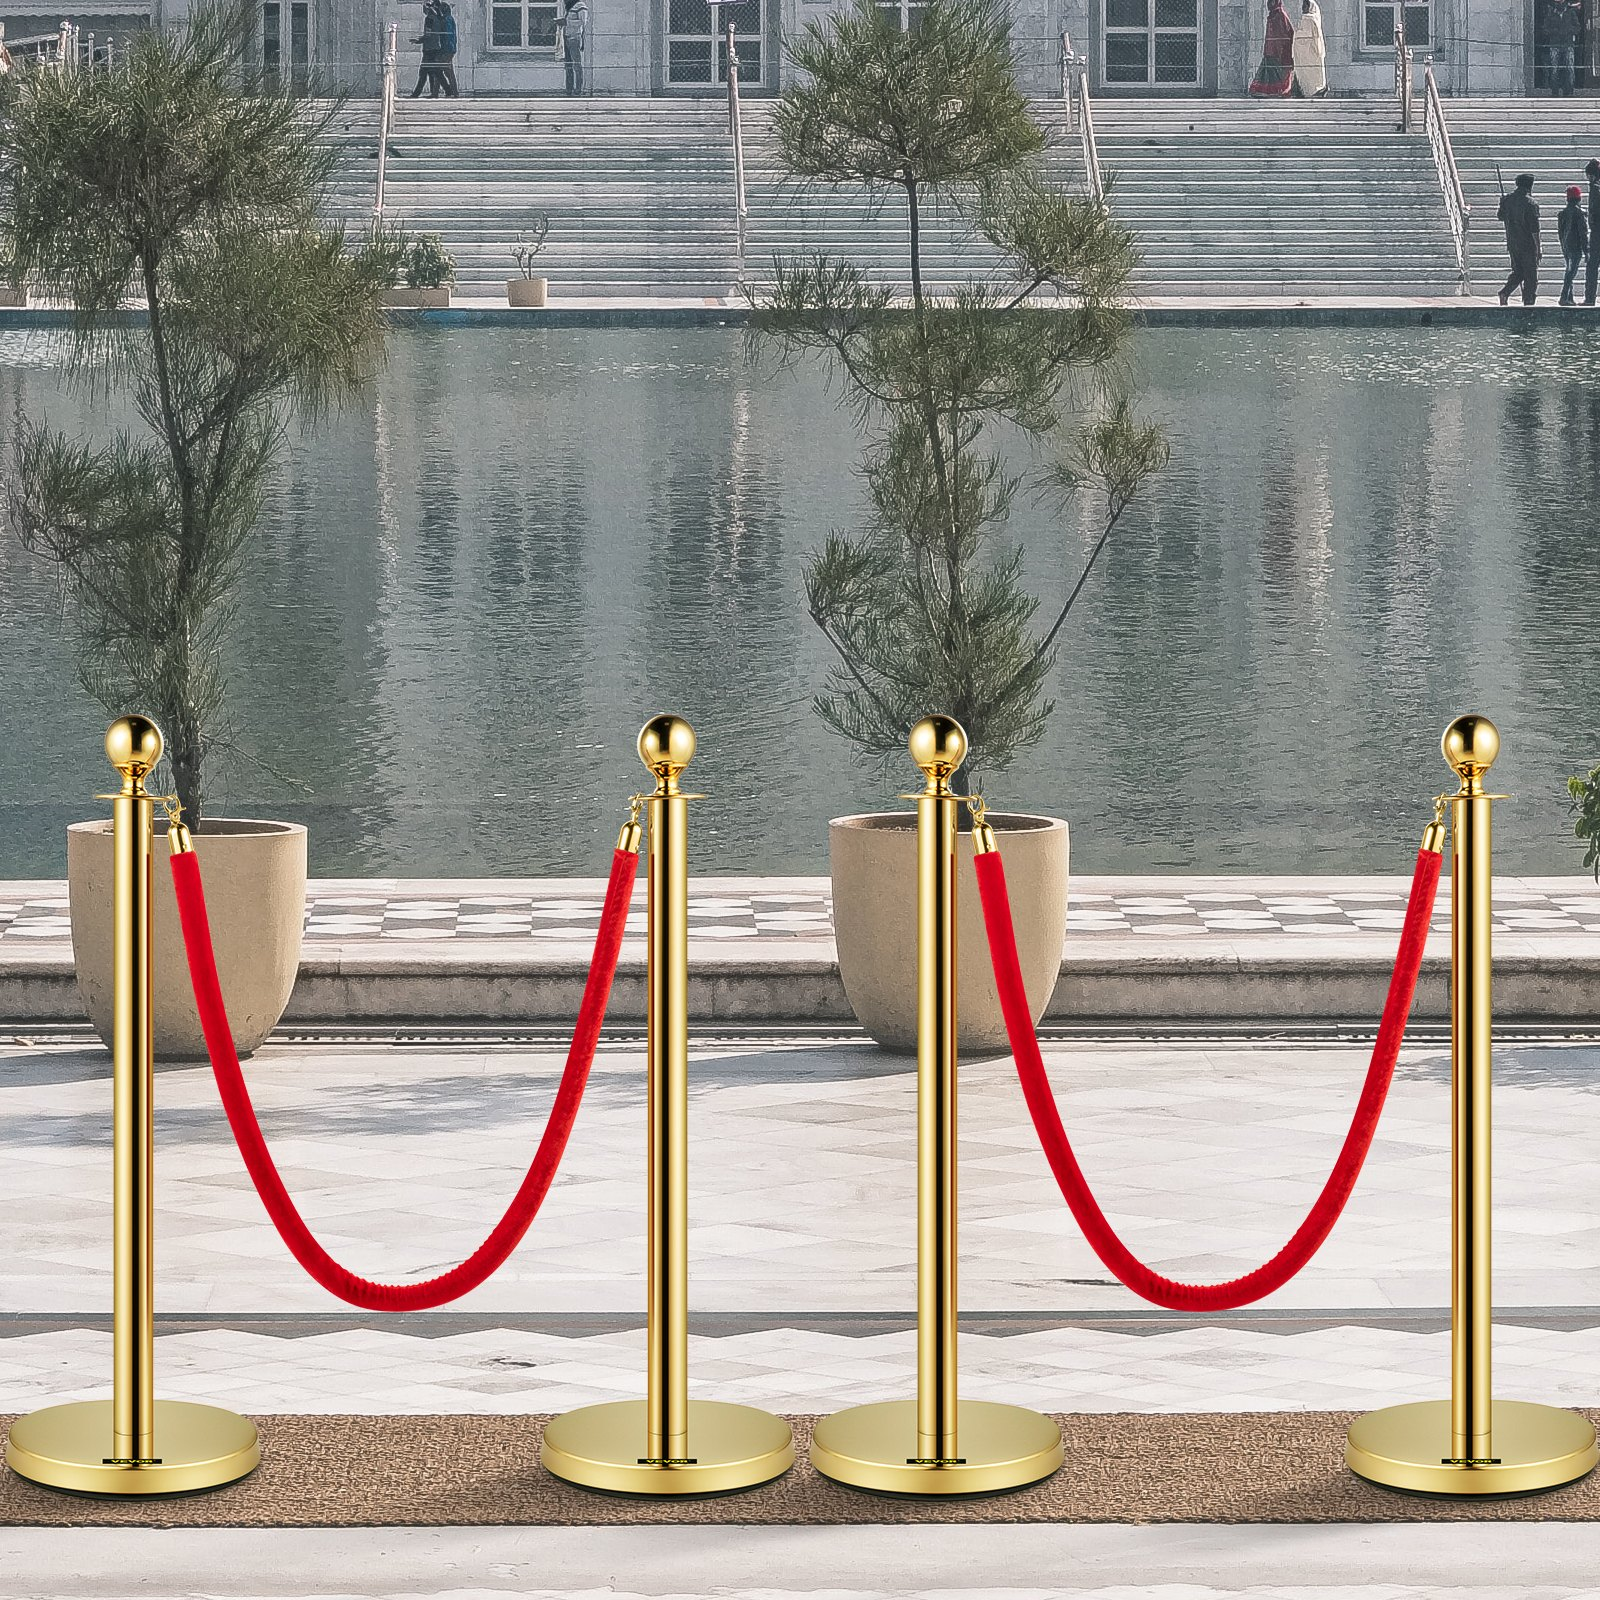 VEVOR Velvet Ropes and Posts, 5 ft/1.5 m Red Rope, Stainless Steel Gold Stanchion with Ball Top, Red Crowd Control Barrier Used for Theaters, Party, Wedding, Exhibition, Ticket Offices 4 packSets, Goodies N Stuff